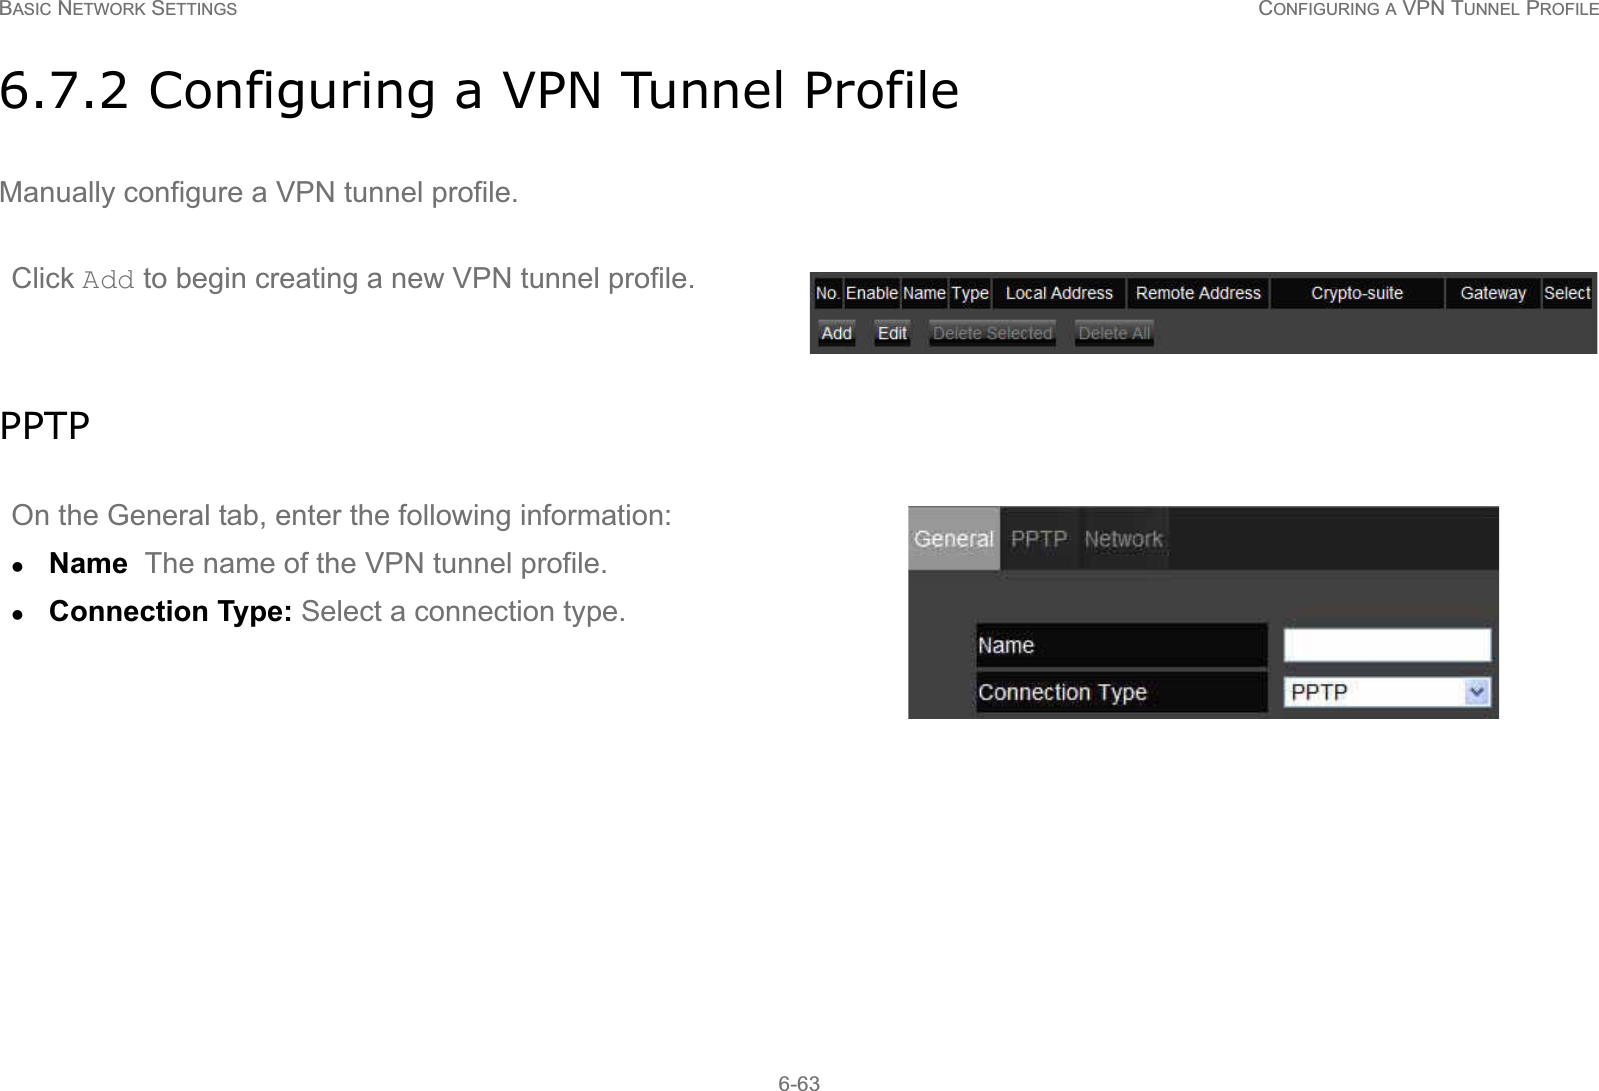 BASIC NETWORK SETTINGS CONFIGURING A VPN TUNNEL PROFILE6-636.7.2 Configuring a VPN Tunnel ProfileManually configure a VPN tunnel profile.PPTPClick Add to begin creating a new VPN tunnel profile.On the General tab, enter the following information:zName  The name of the VPN tunnel profile.zConnection Type: Select a connection type.